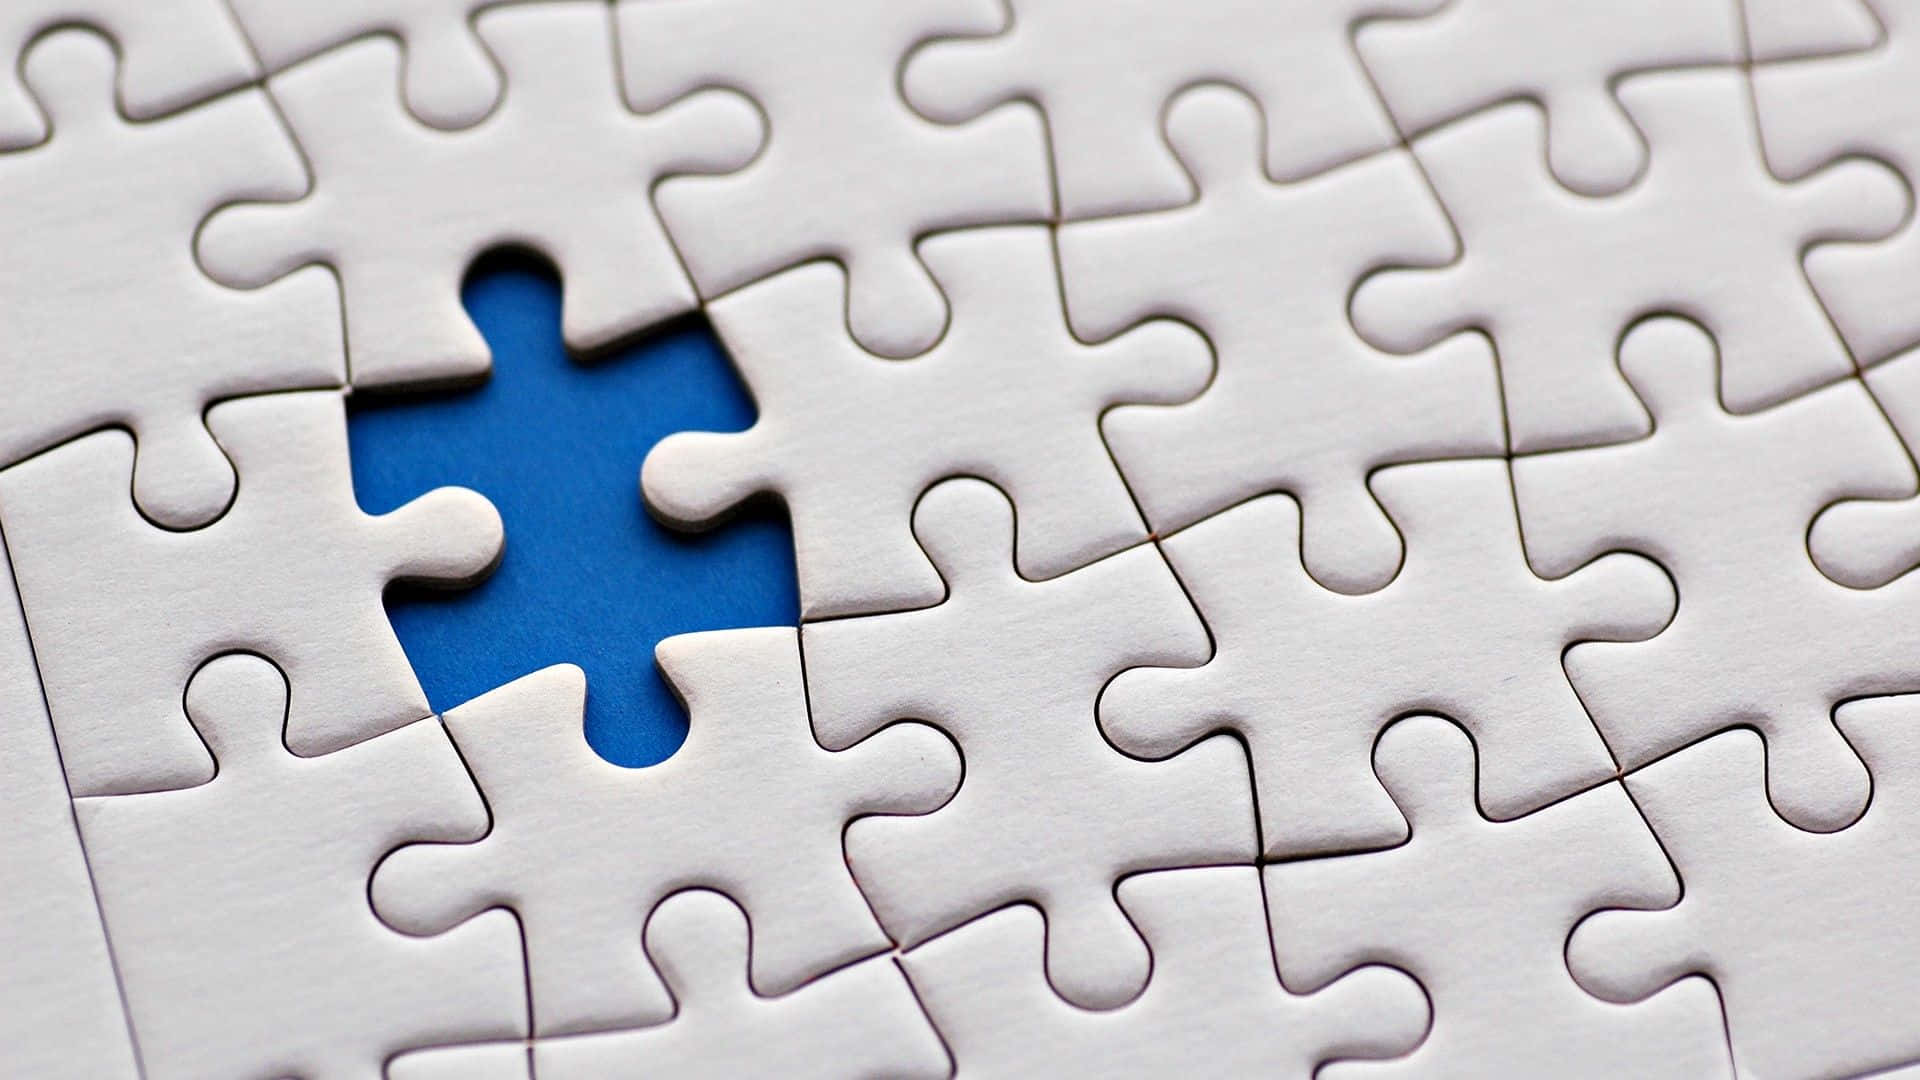 A Blue Piece Of A Puzzle Missing